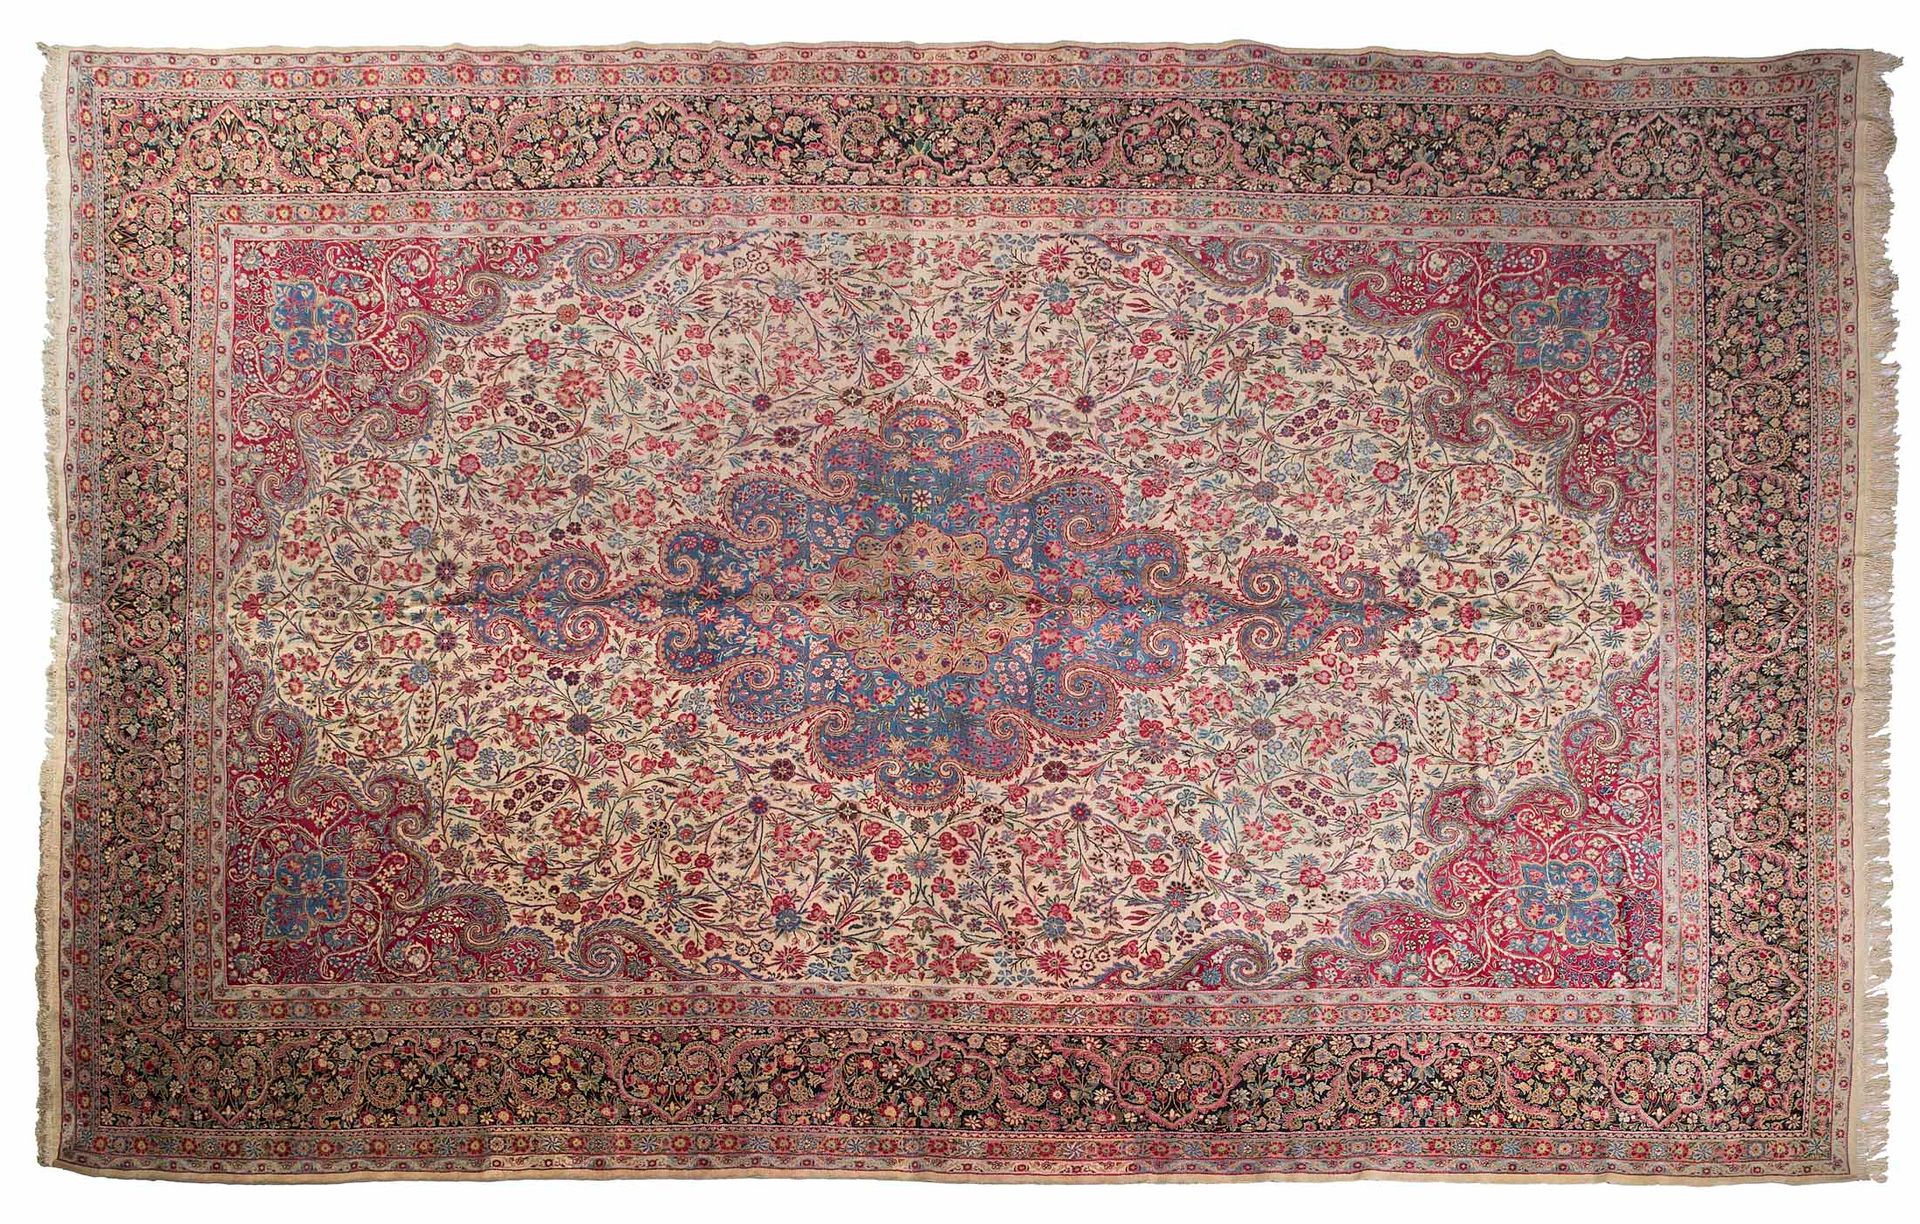 Null Very important KIRMAN carpet (Persia), early 20th century

Dimensions : 670&hellip;